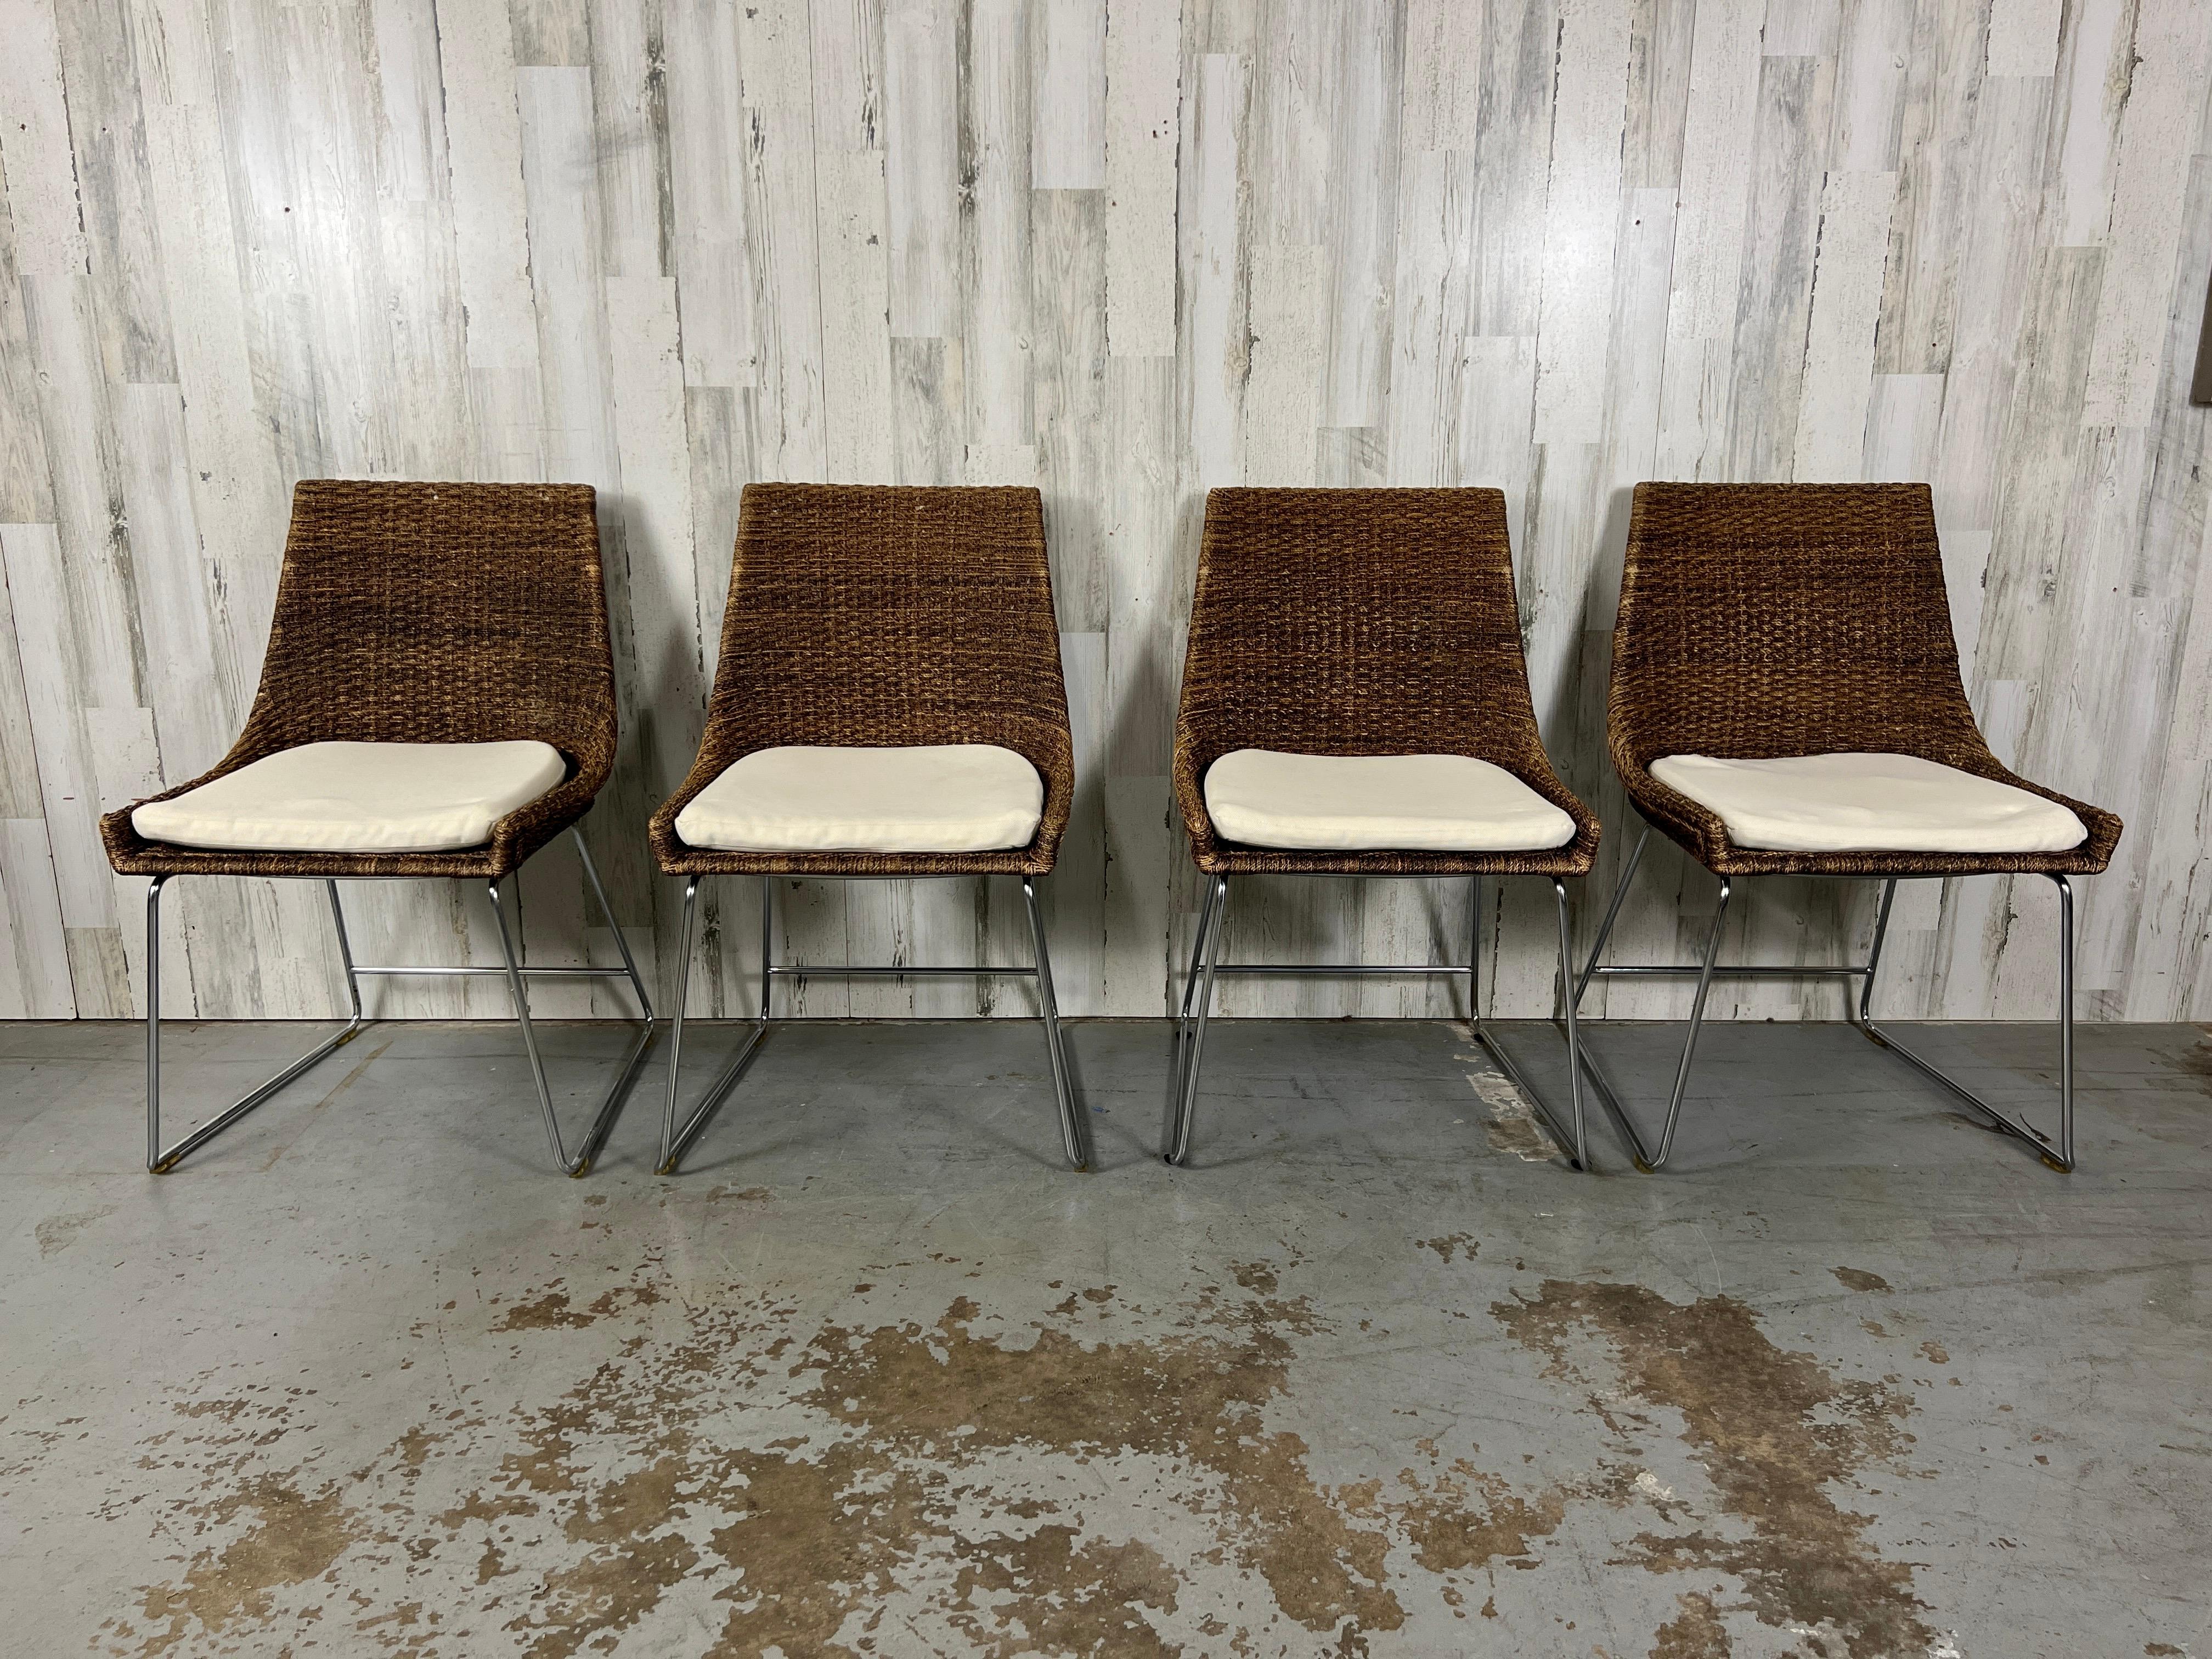 Vintage Mcguire organic modern dining chairs with woven Coco Abaca seats with chrome sled style legs.